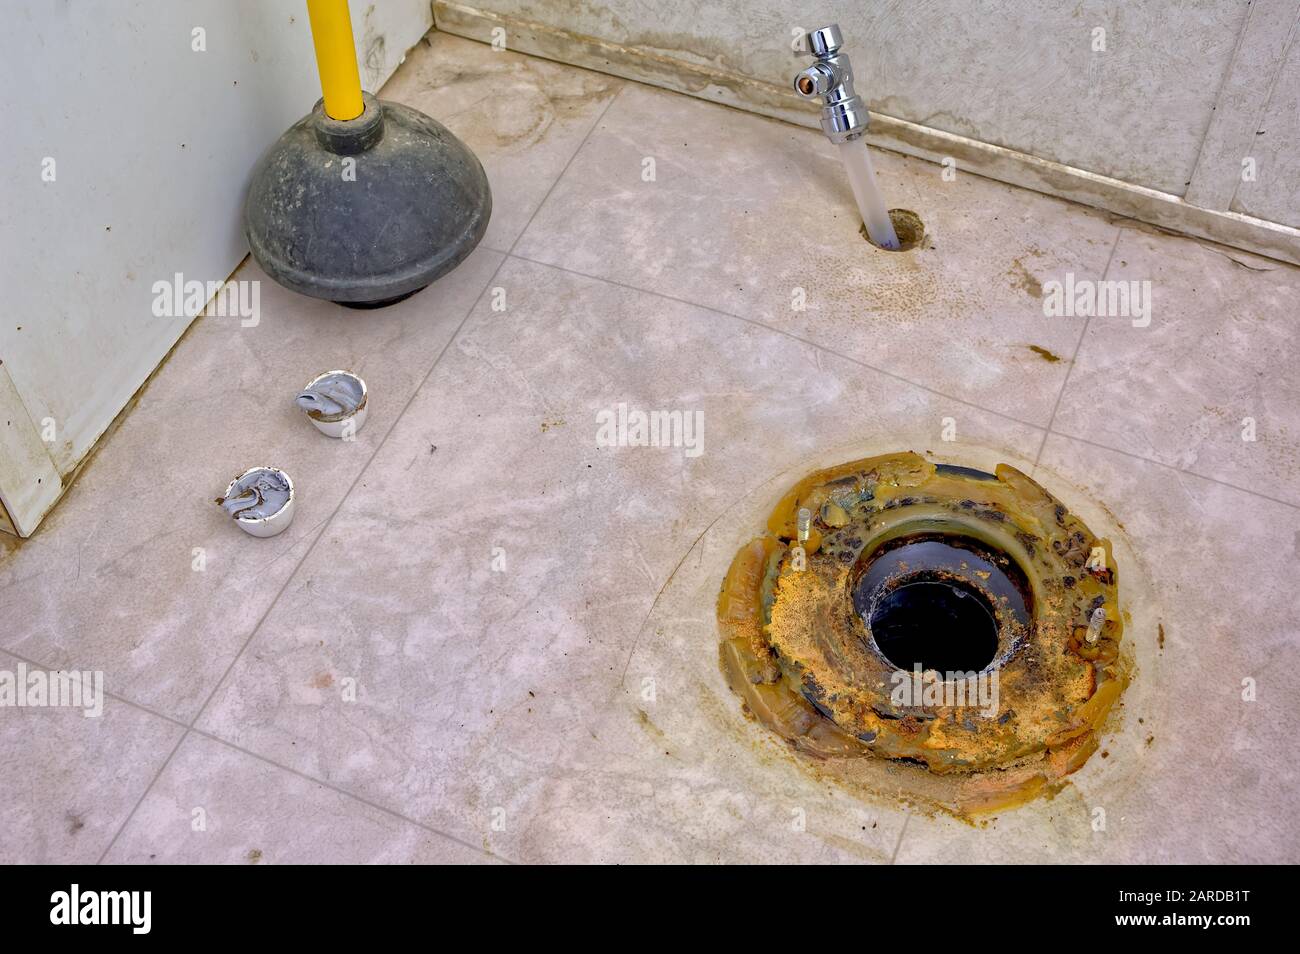 Replacing A Toilet Wax Ring - The Daily Guardian